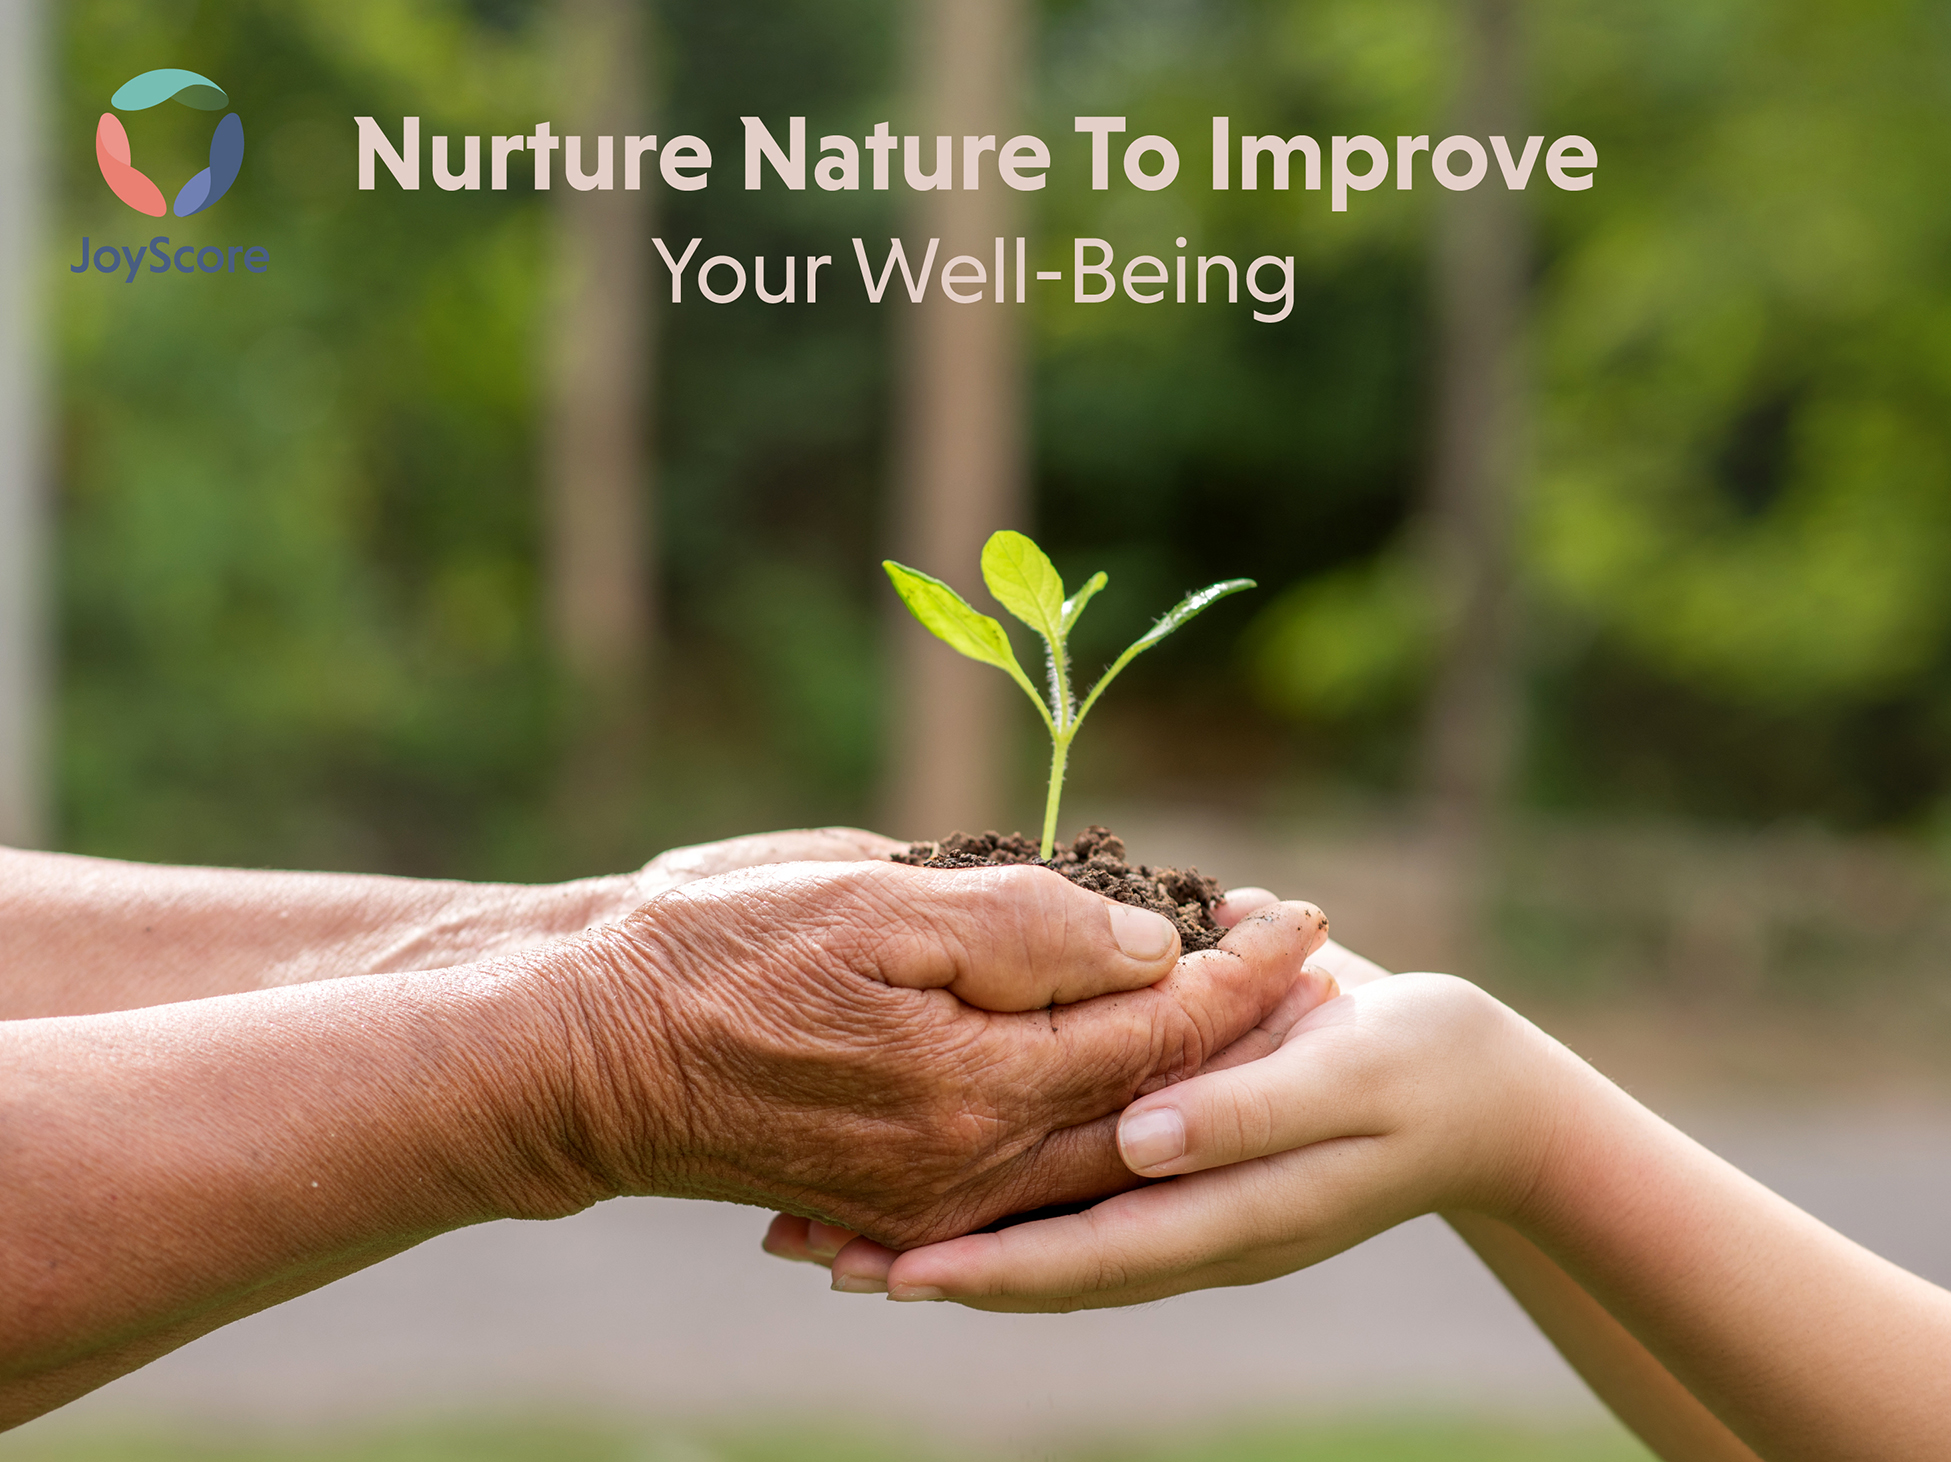 Nurture Nature to Improve your Well-Being